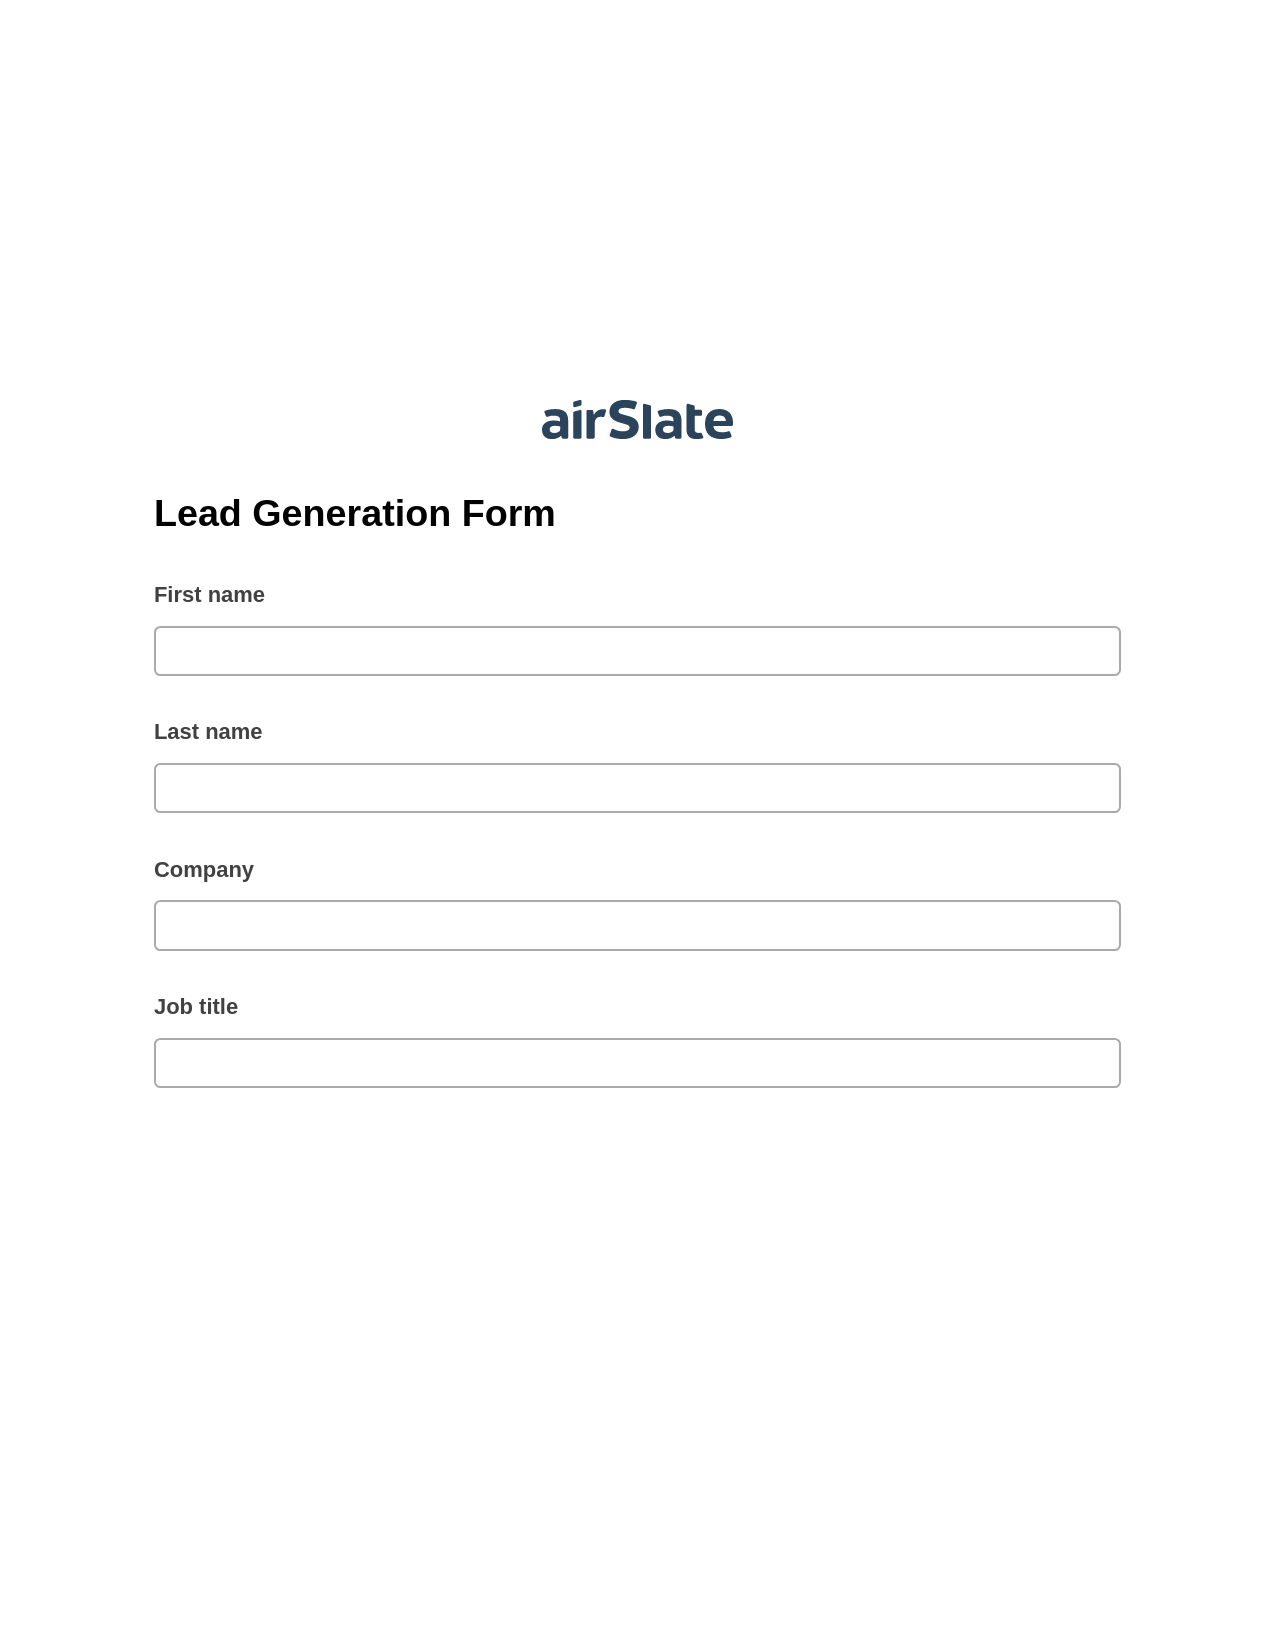 Lead Generation Form Pre-fill from Google Sheets Bot, Send a Slate with Roles Bot, Export to Smartsheet